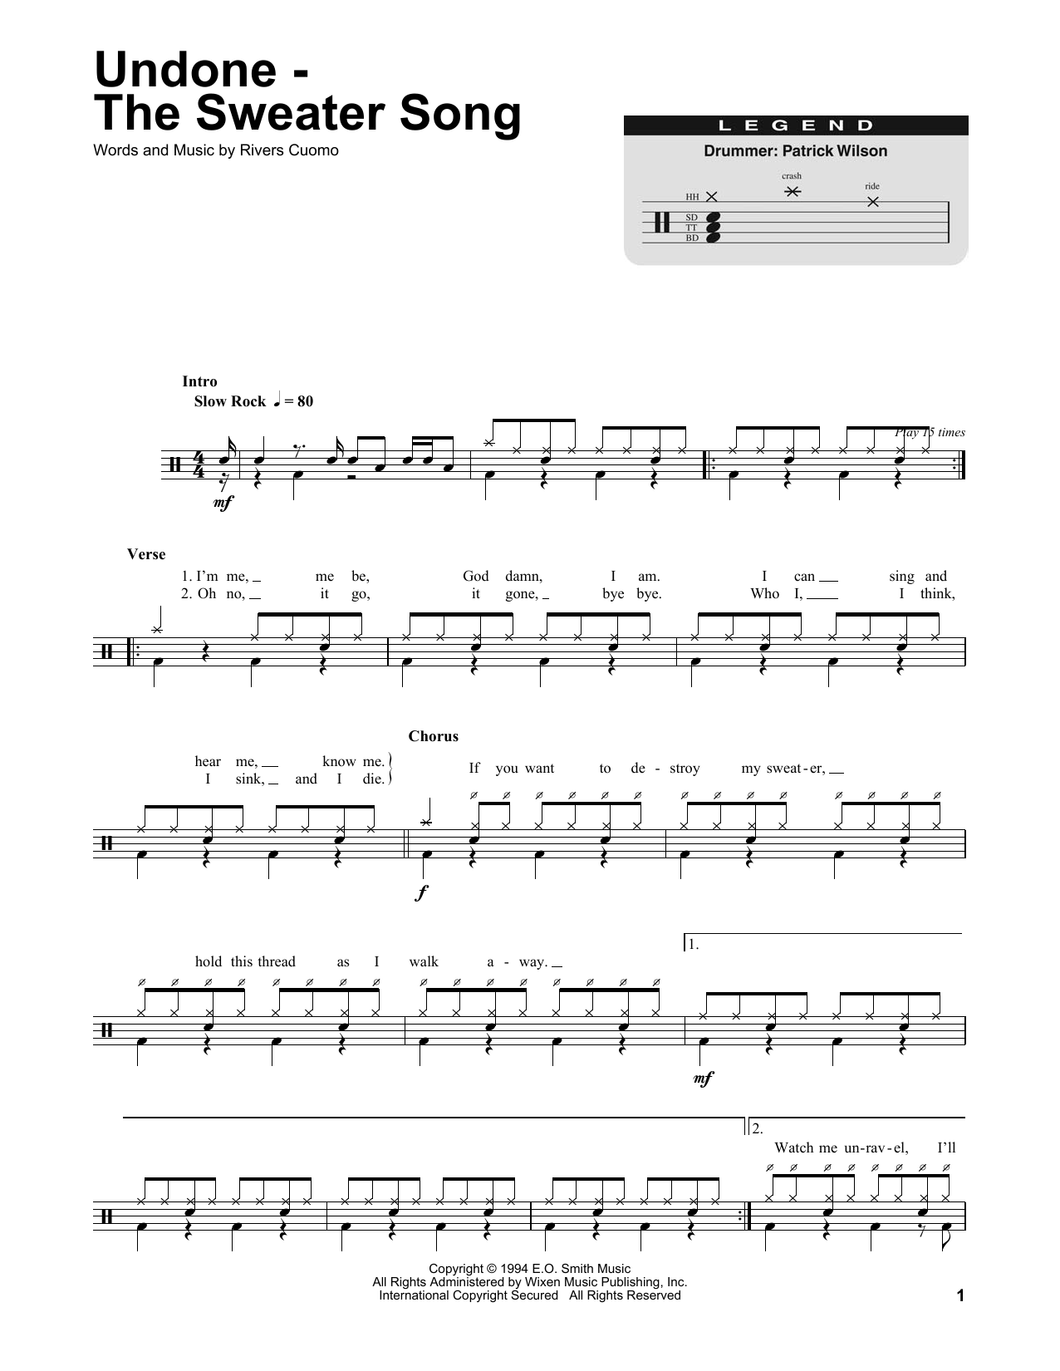 Undone (The Sweater Song) - Weezer - Full Drum Transcription / Drum Sheet Music - SheetMusicDirect DT